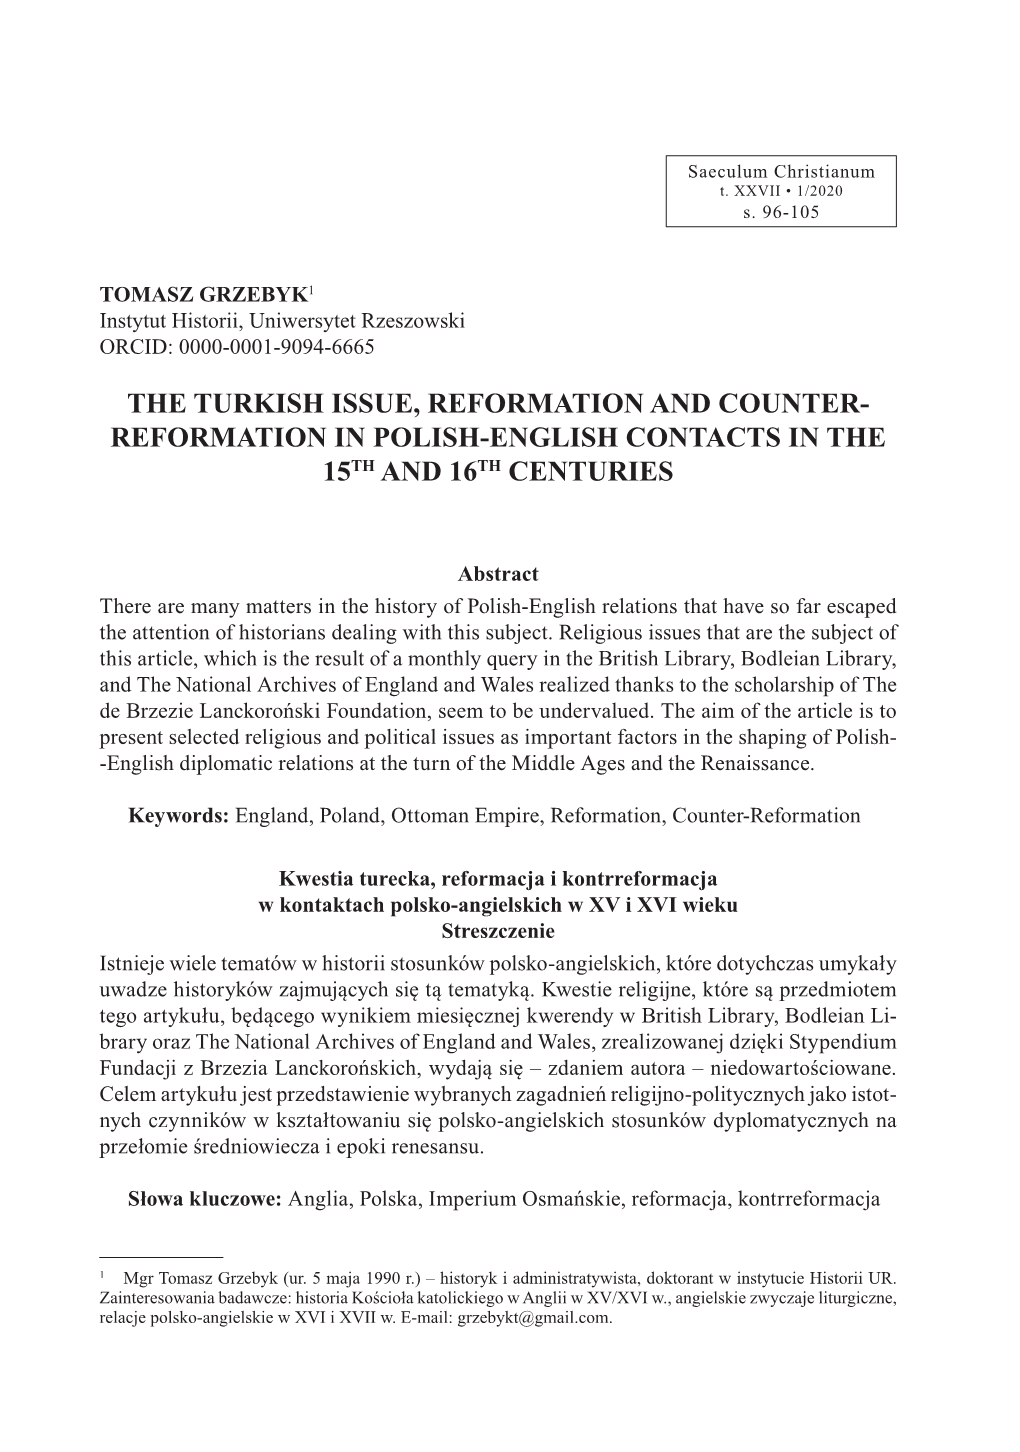 The Turkish Issue, Reformation and Counter- Reformation in Polish-English Contacts in the 15Th and 16Th Centuries